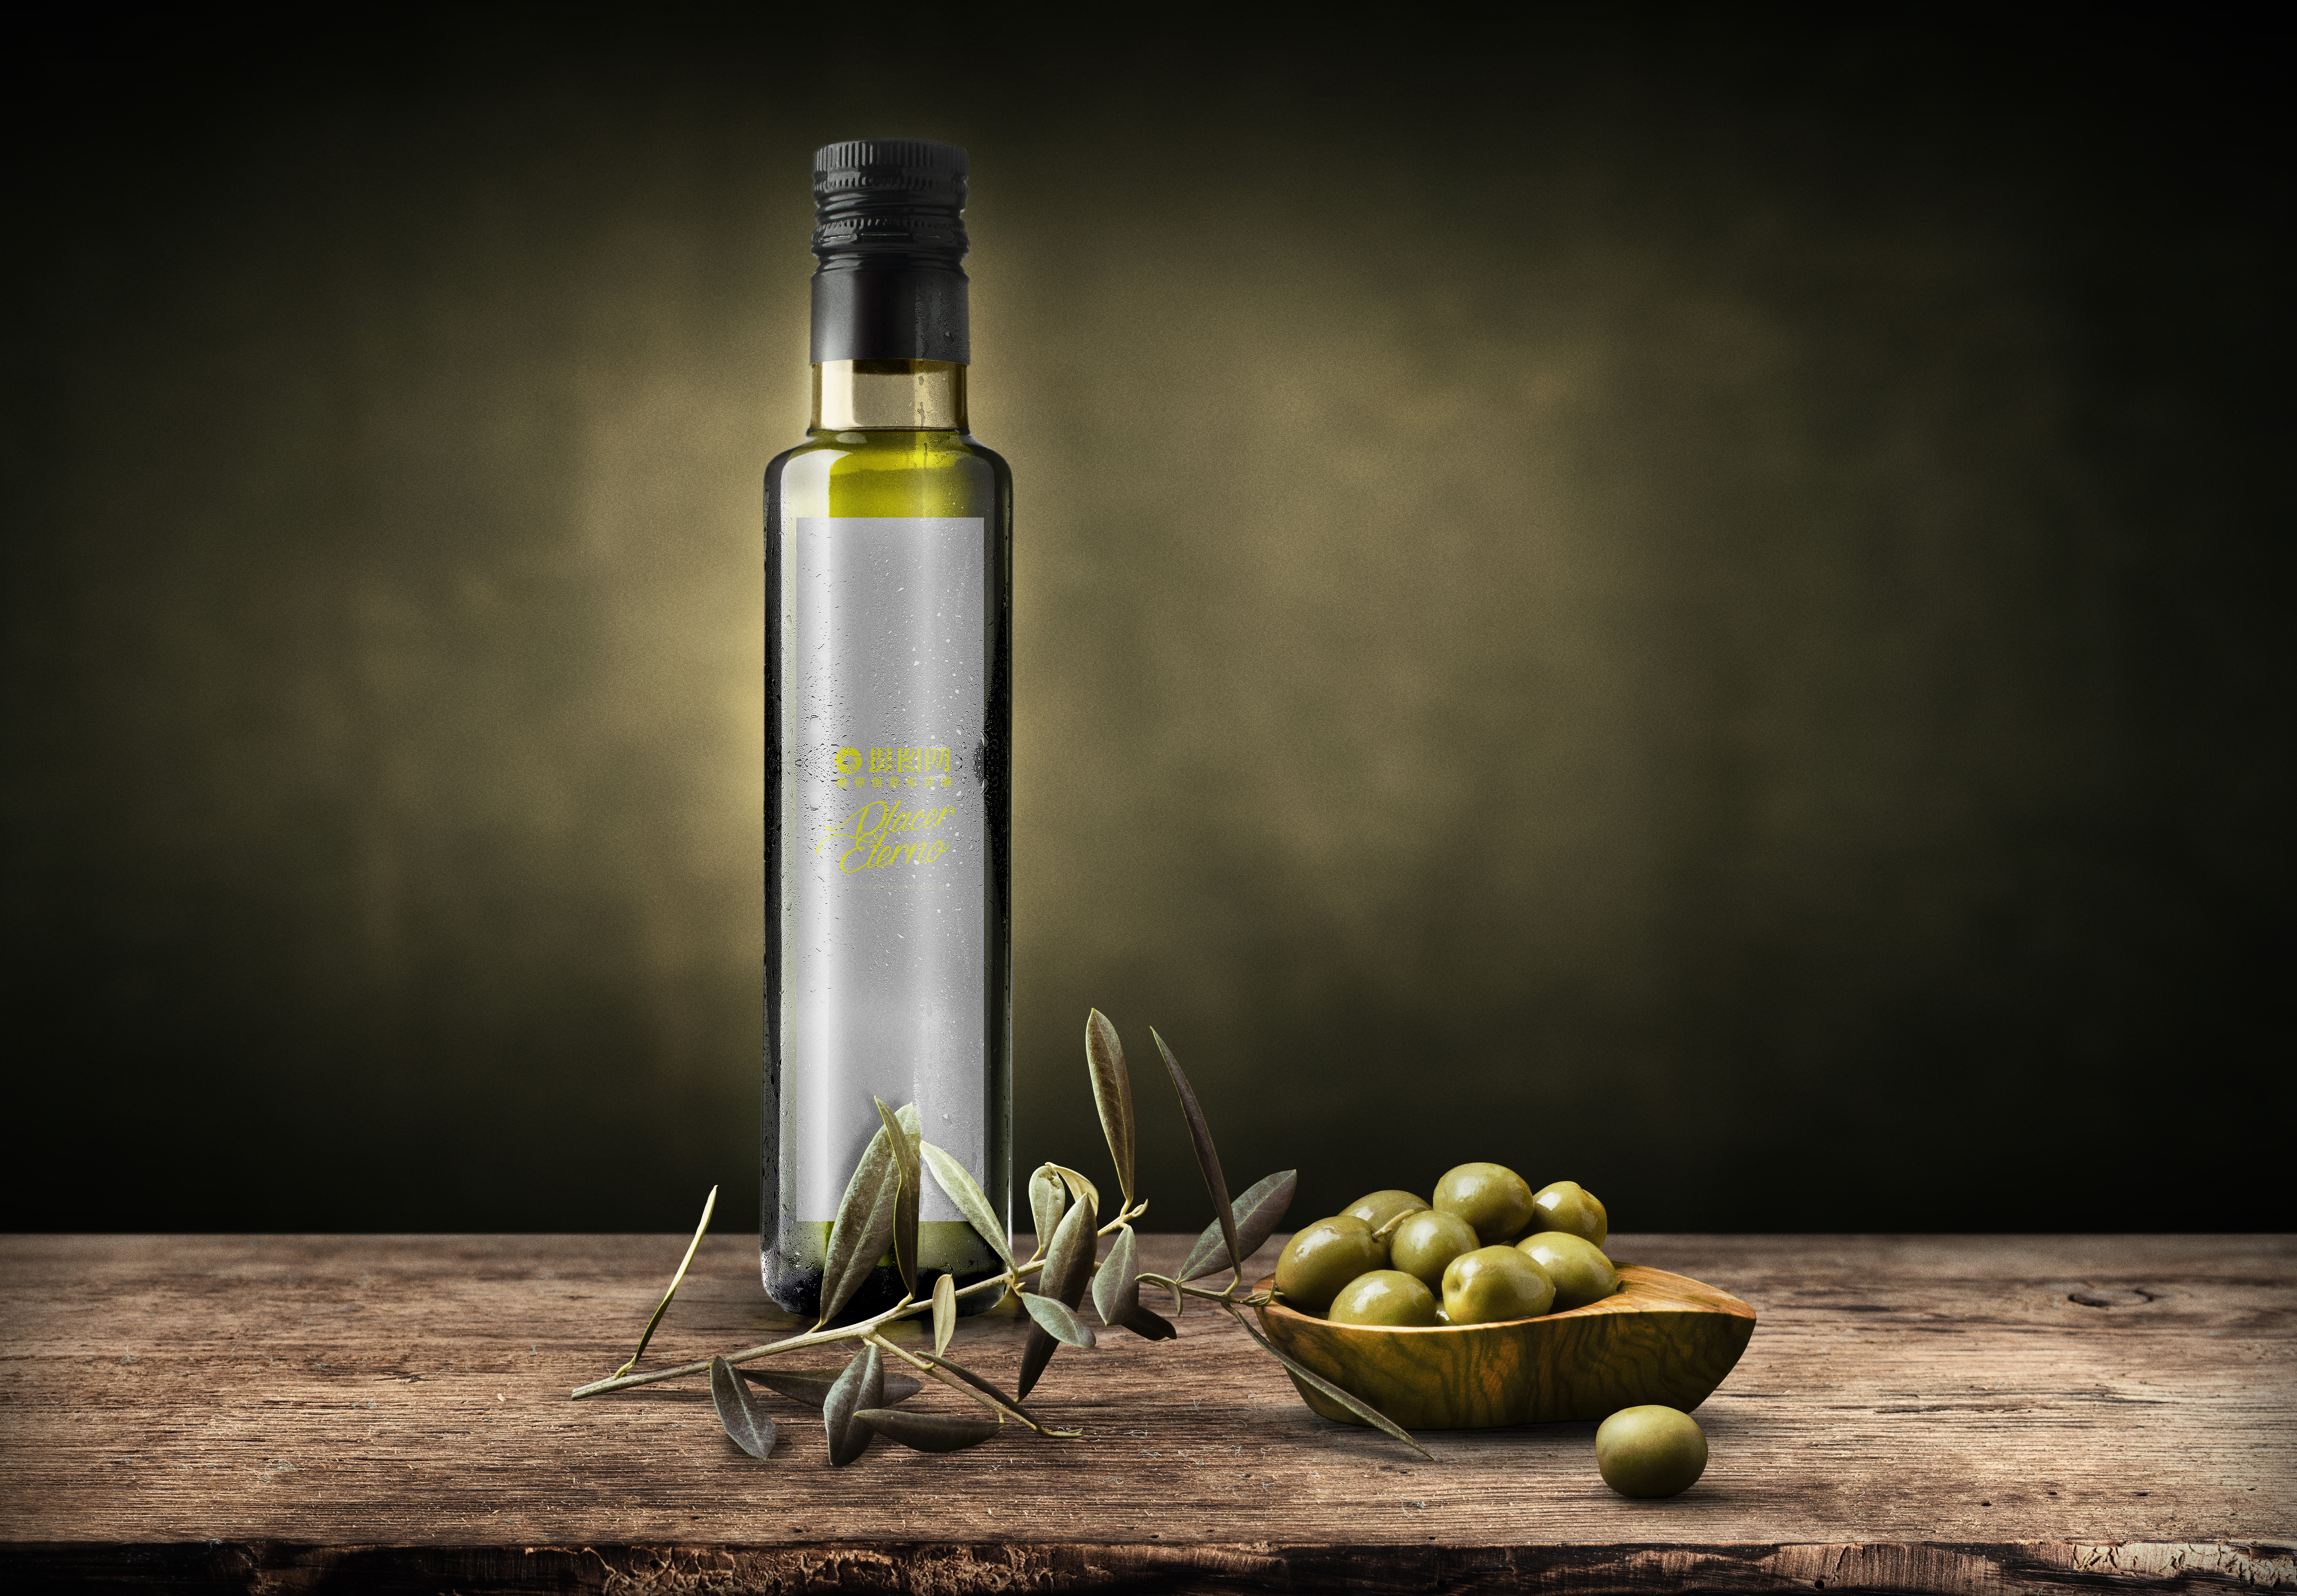 A bottle of olive oil. Olive Oil масло оливковое. Мокап бутылки оливкового масла. Олив Ойл масло оливковое. Мариолива оливковое масла.